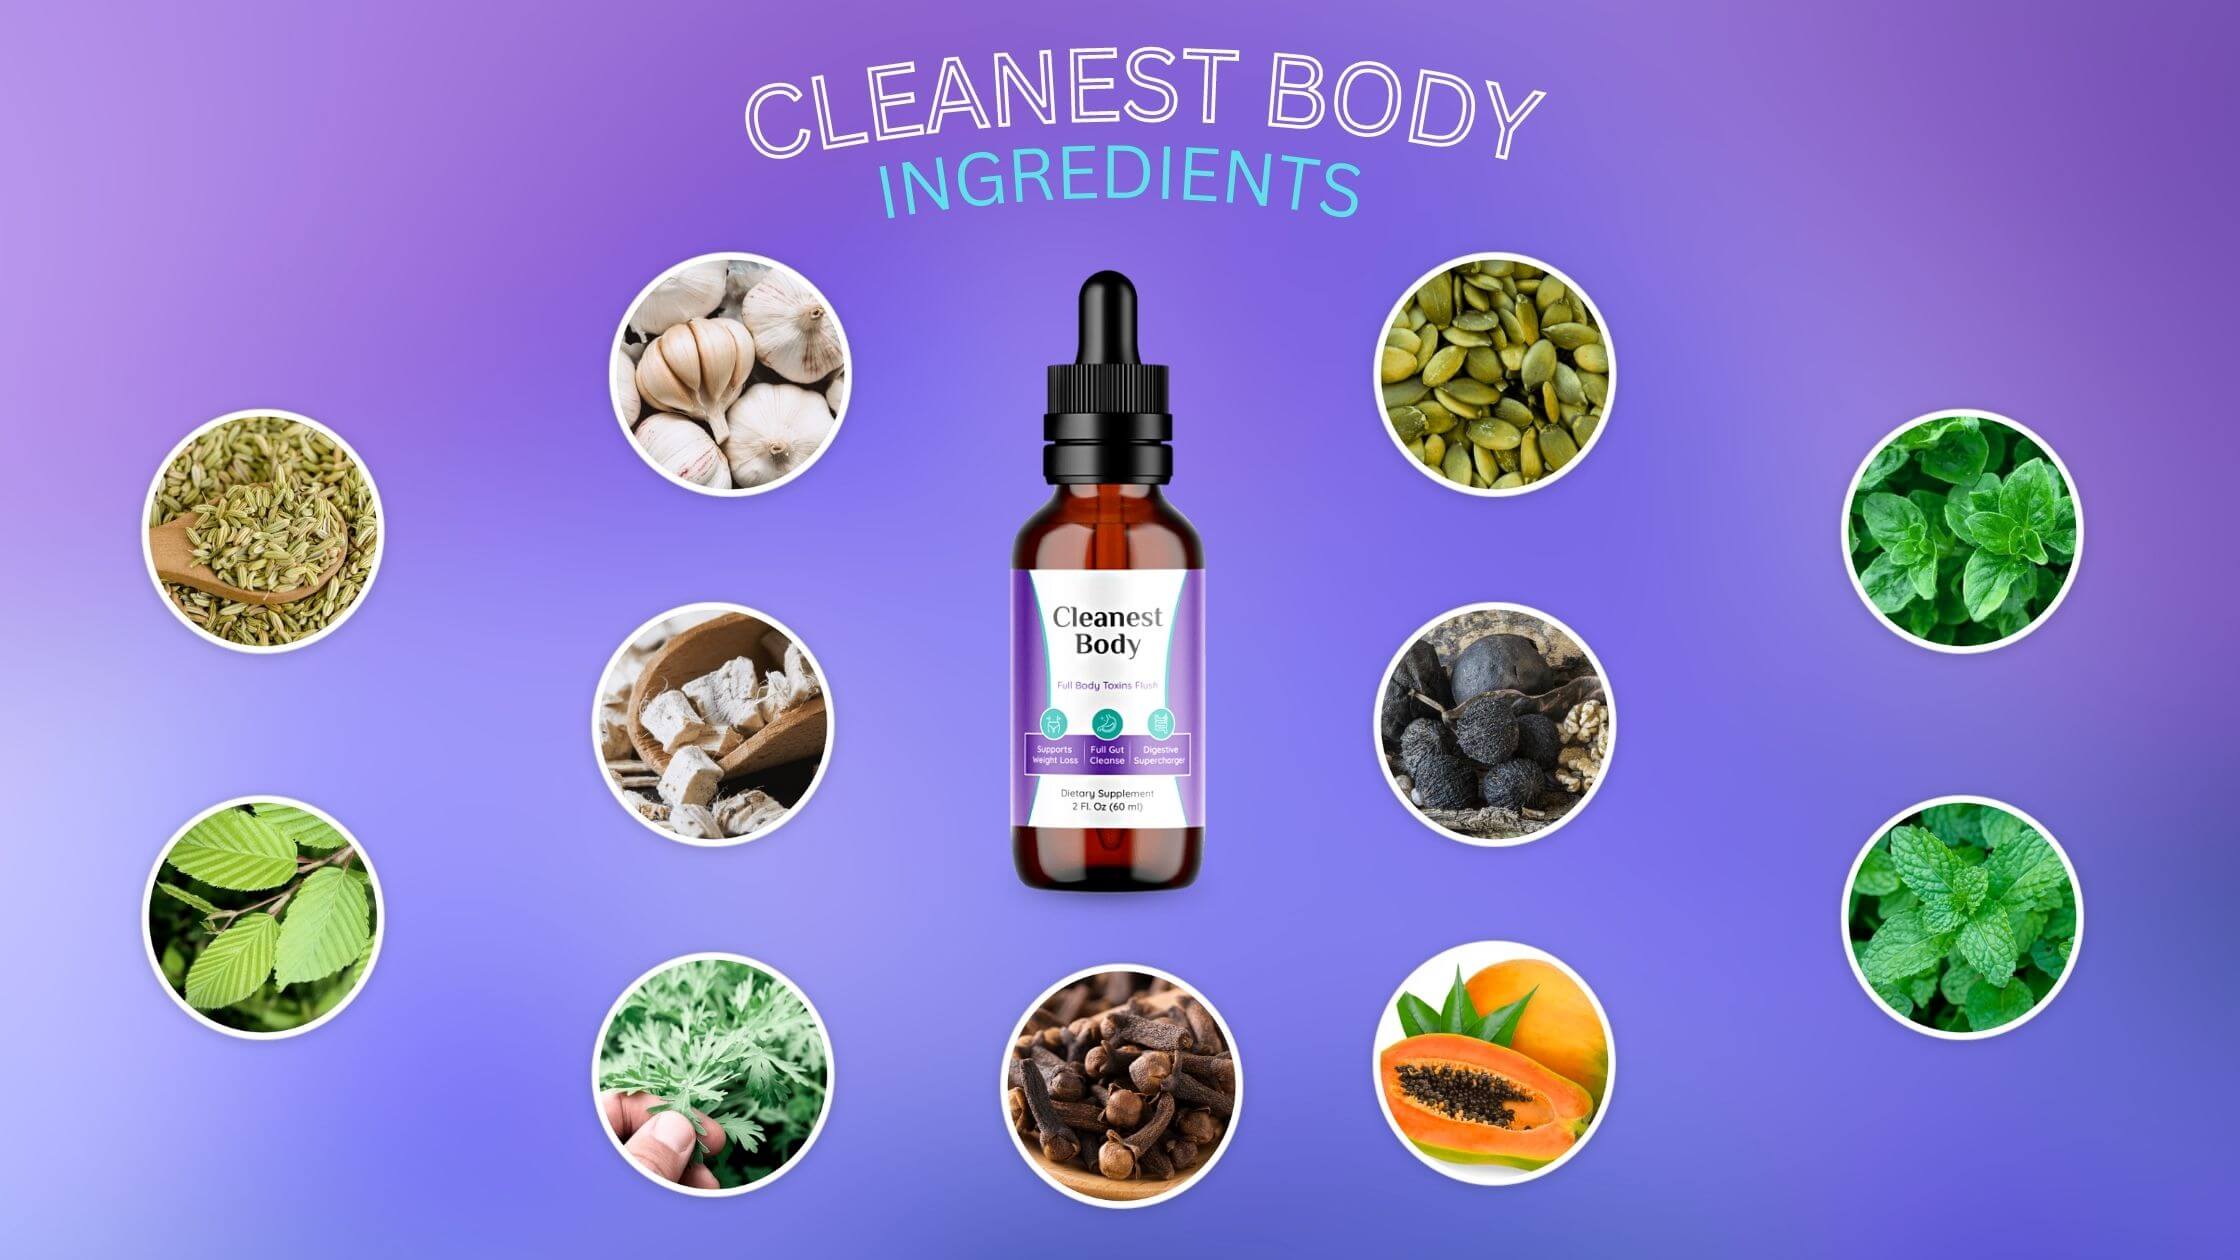 Cleanest Body Ingredients